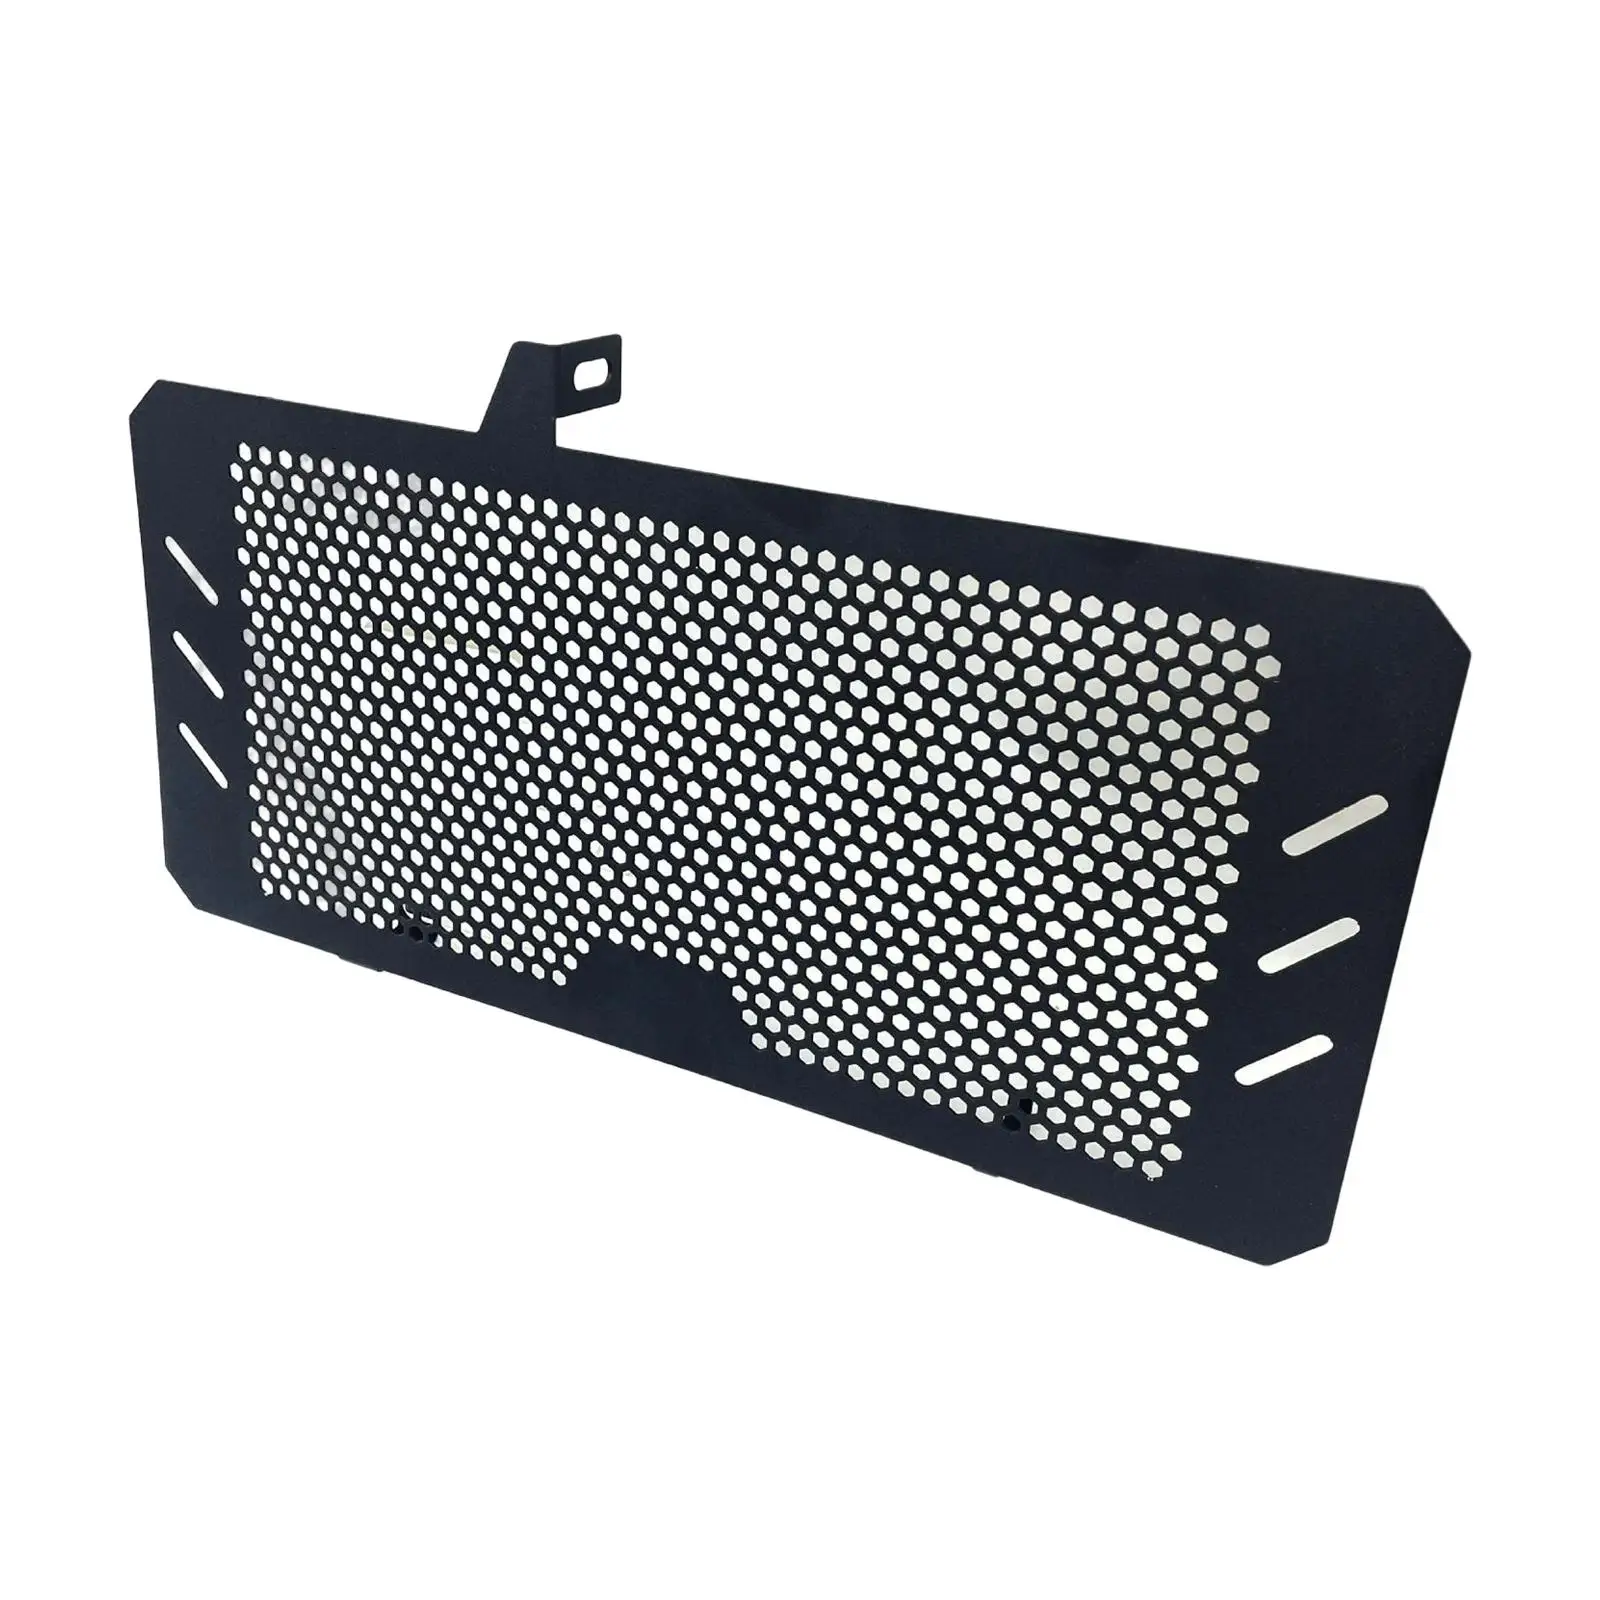 Motorbike Motorcycle Grille Guard for NC750 S / x